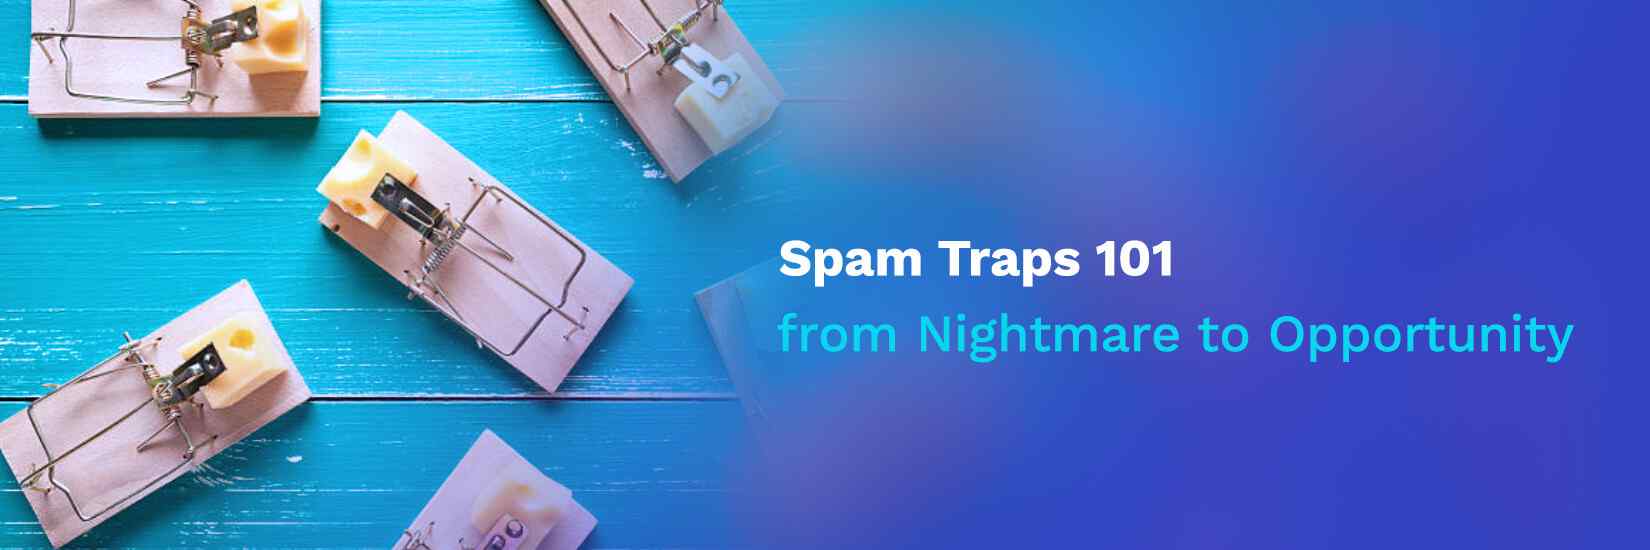 Spam Traps 101: from Nightmare to Opportunity